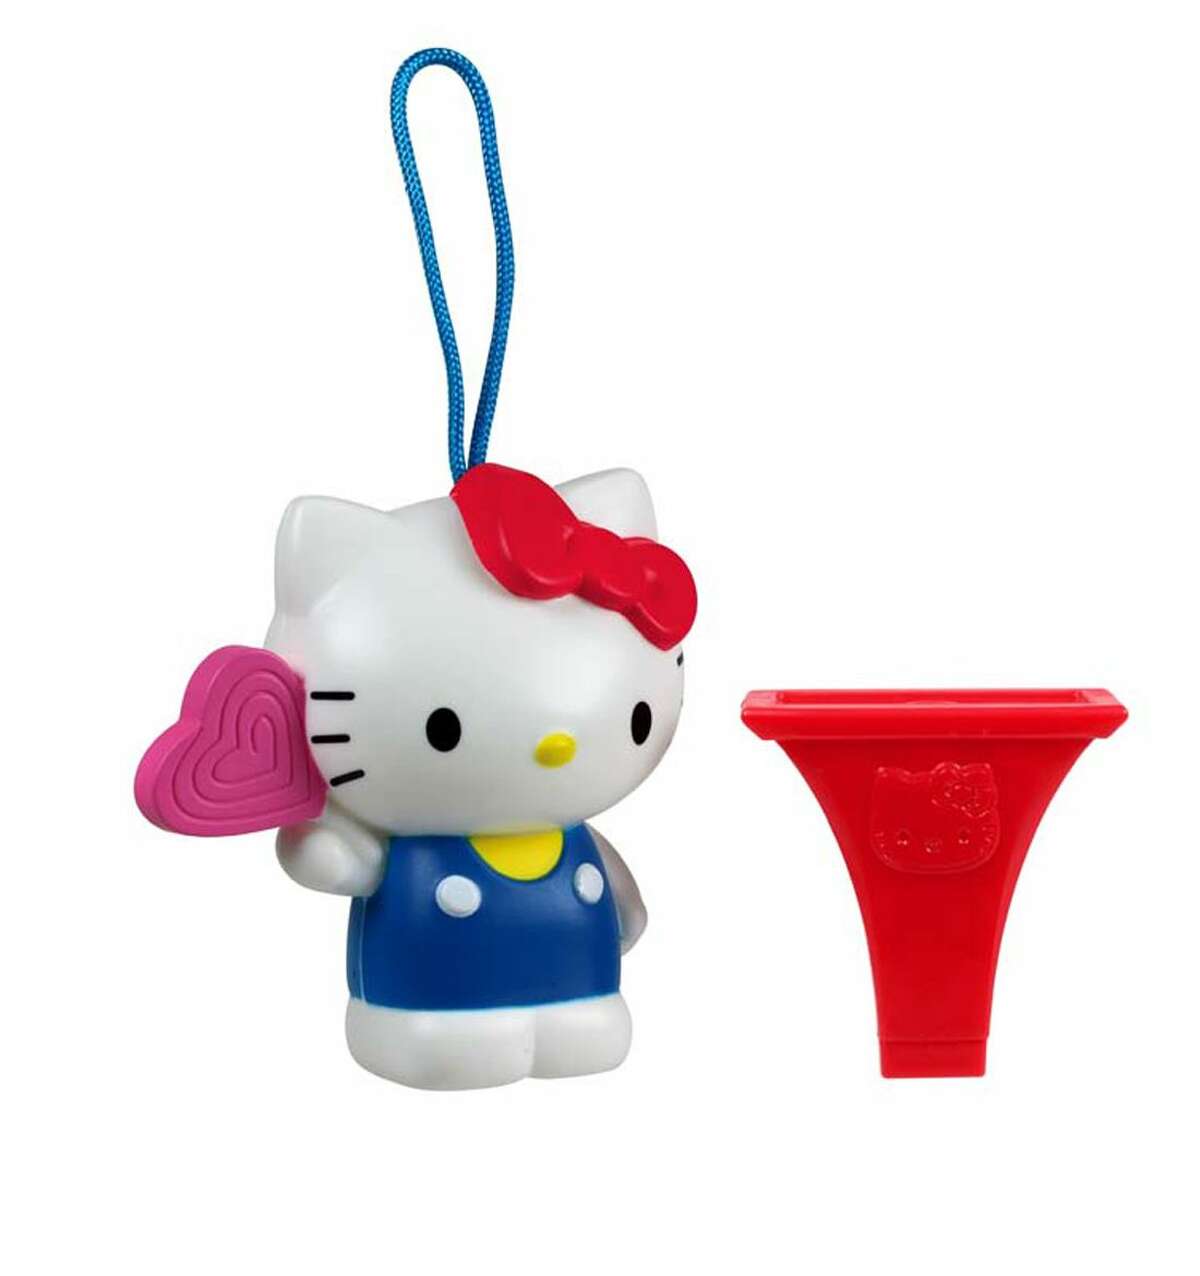 This undated image provided by the U.S. Consumer Product Safety Commission shows a “Hello Kitty Birthday Lollipop” whistle, which McDonald’s gave to children in Happy Meals.